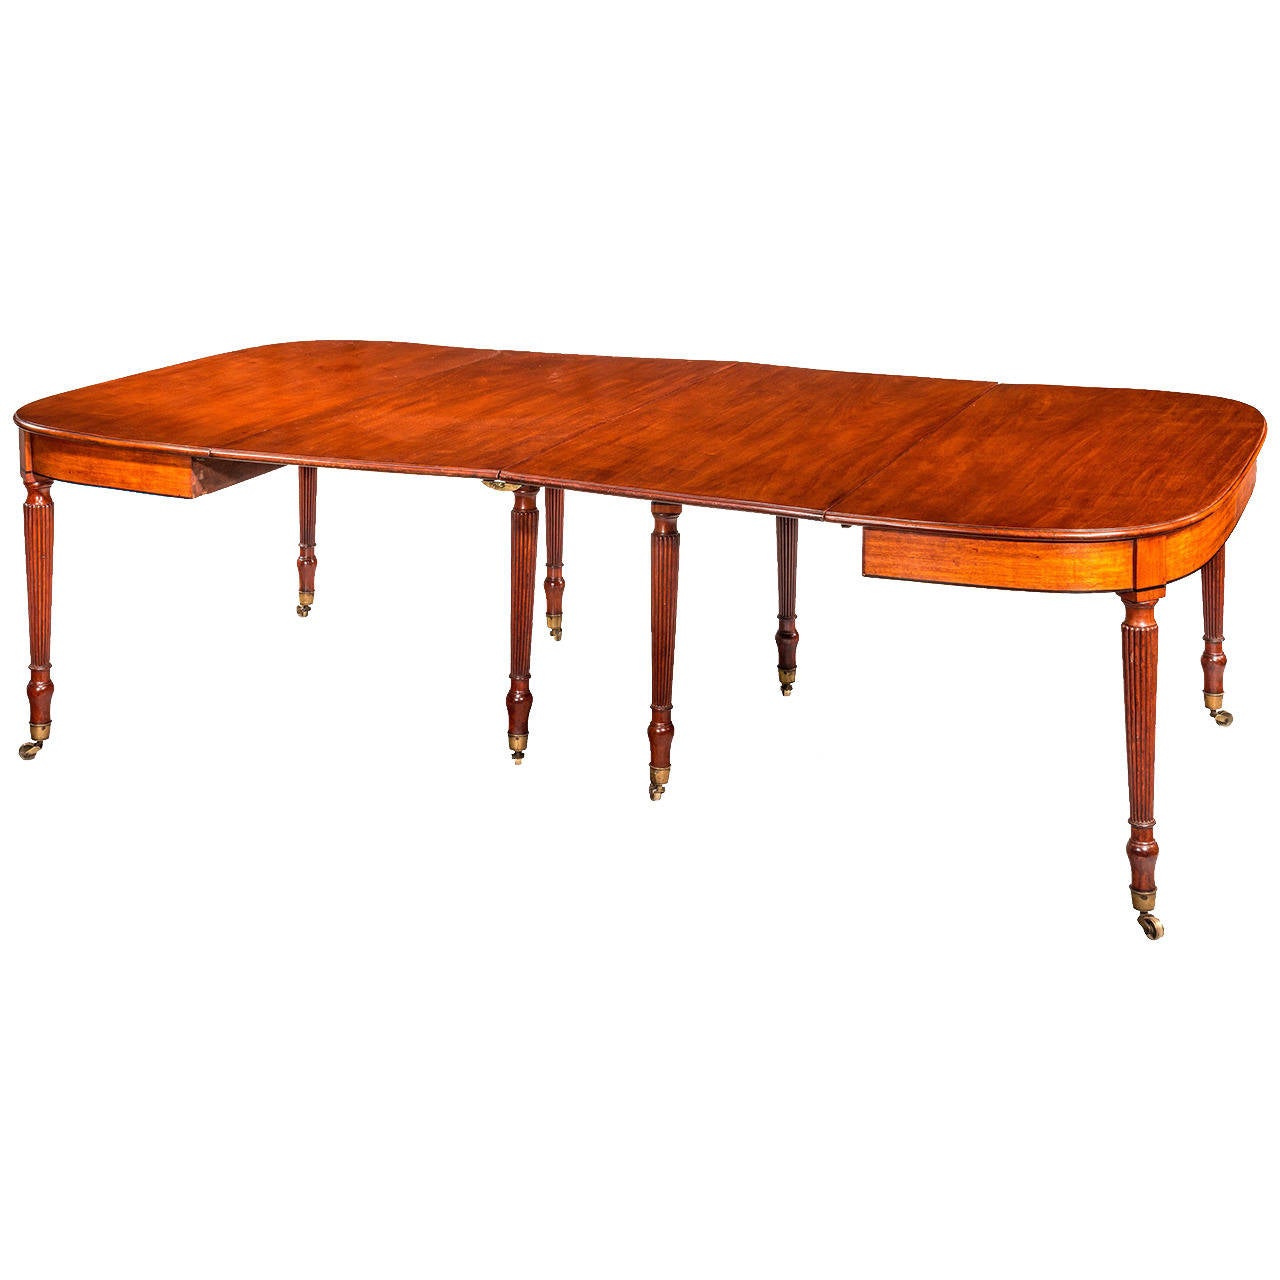 Regency Period Mahogany Dining Table with Seating for 4 to 10 People